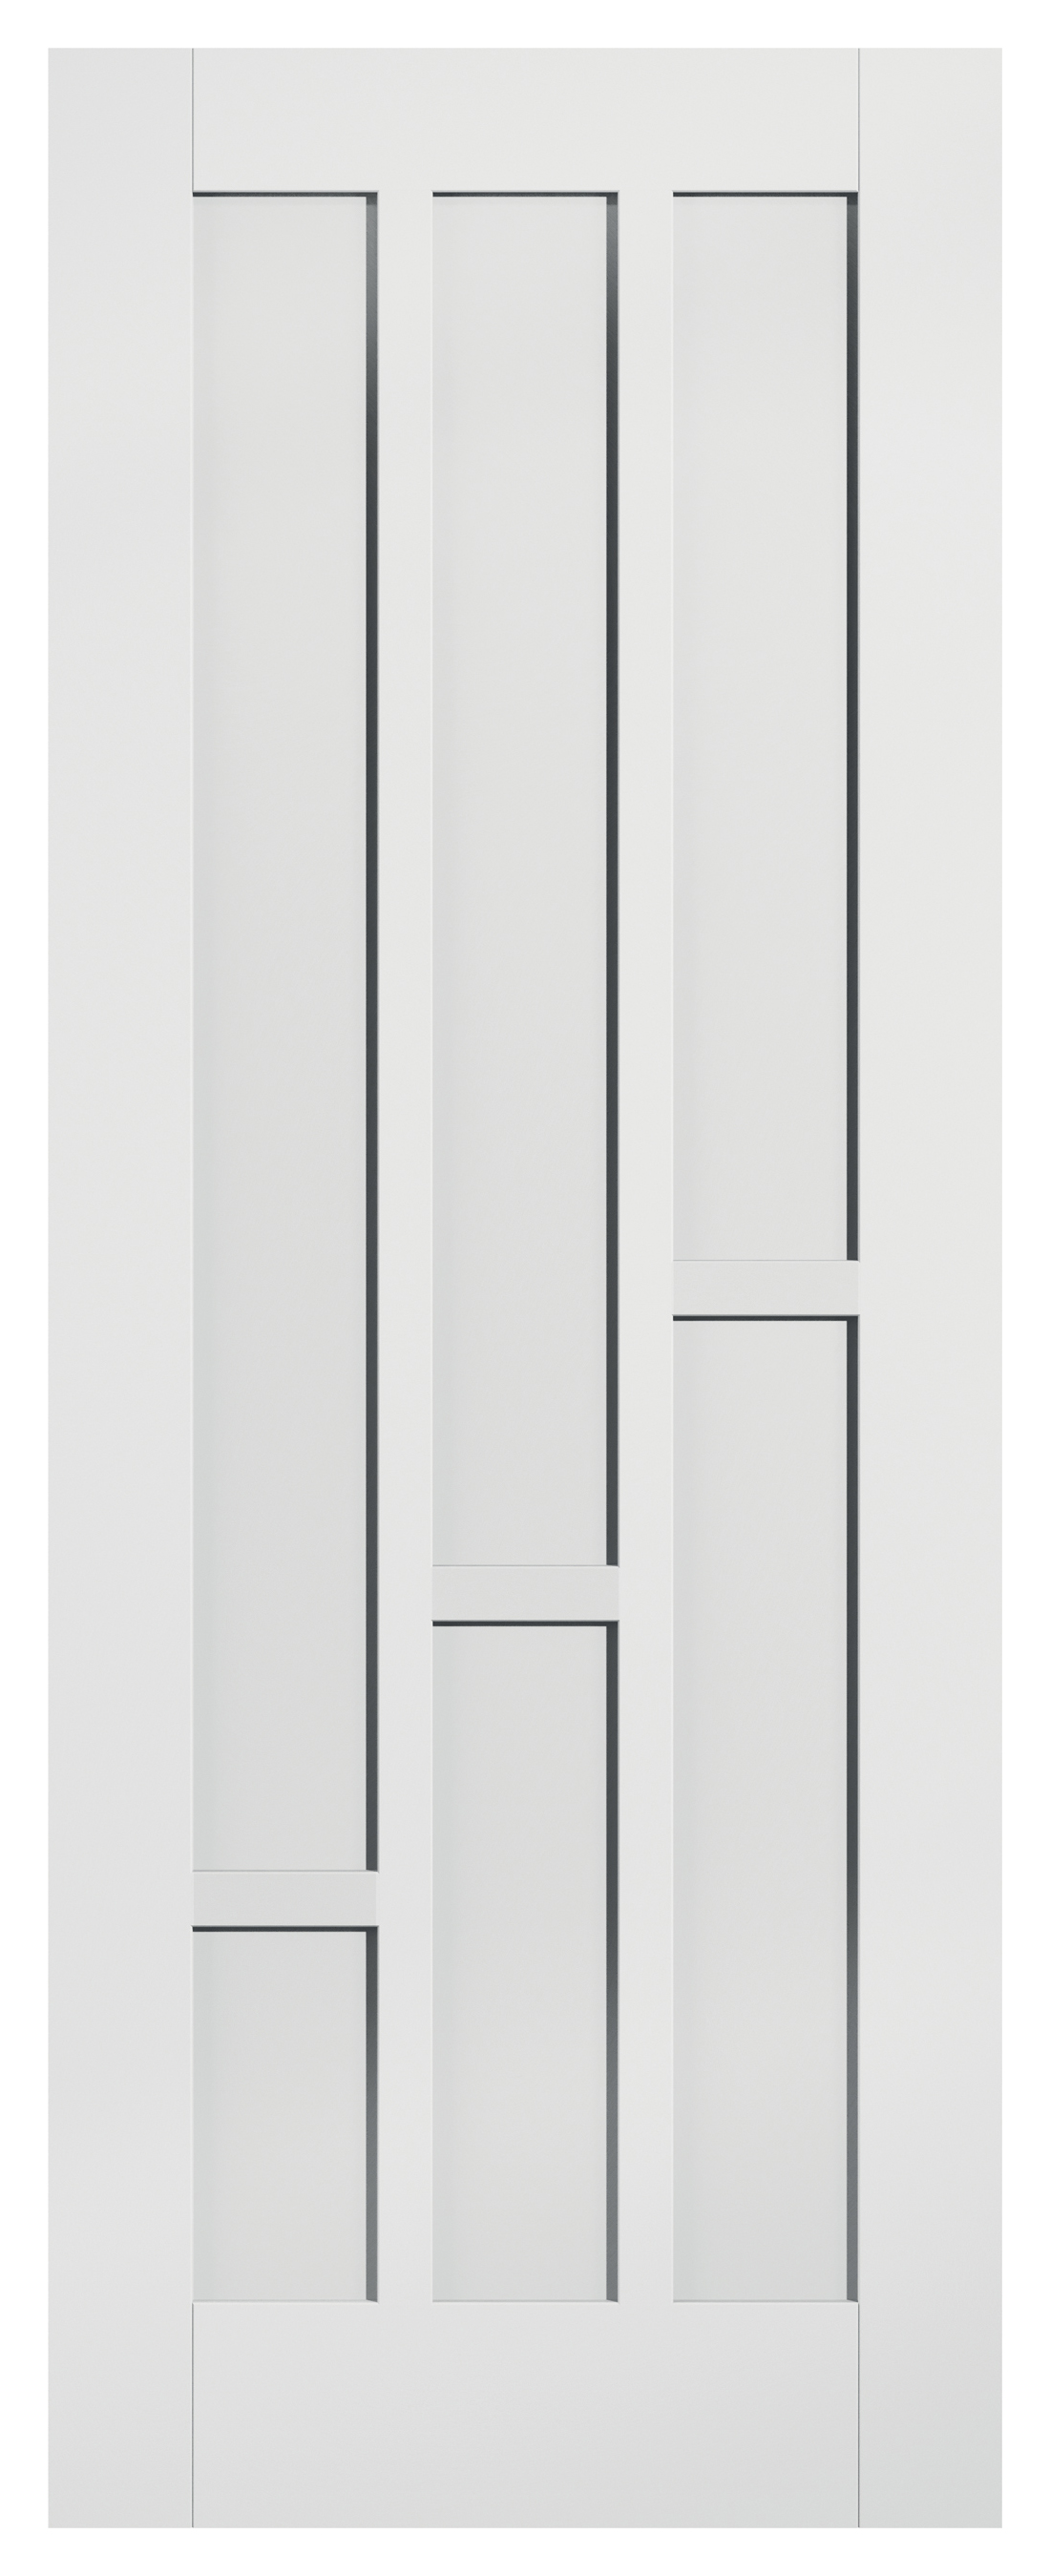 Image of LPD Internal Coventry 6 Panel Primed White Solid Core Door - 686 x 1981mm